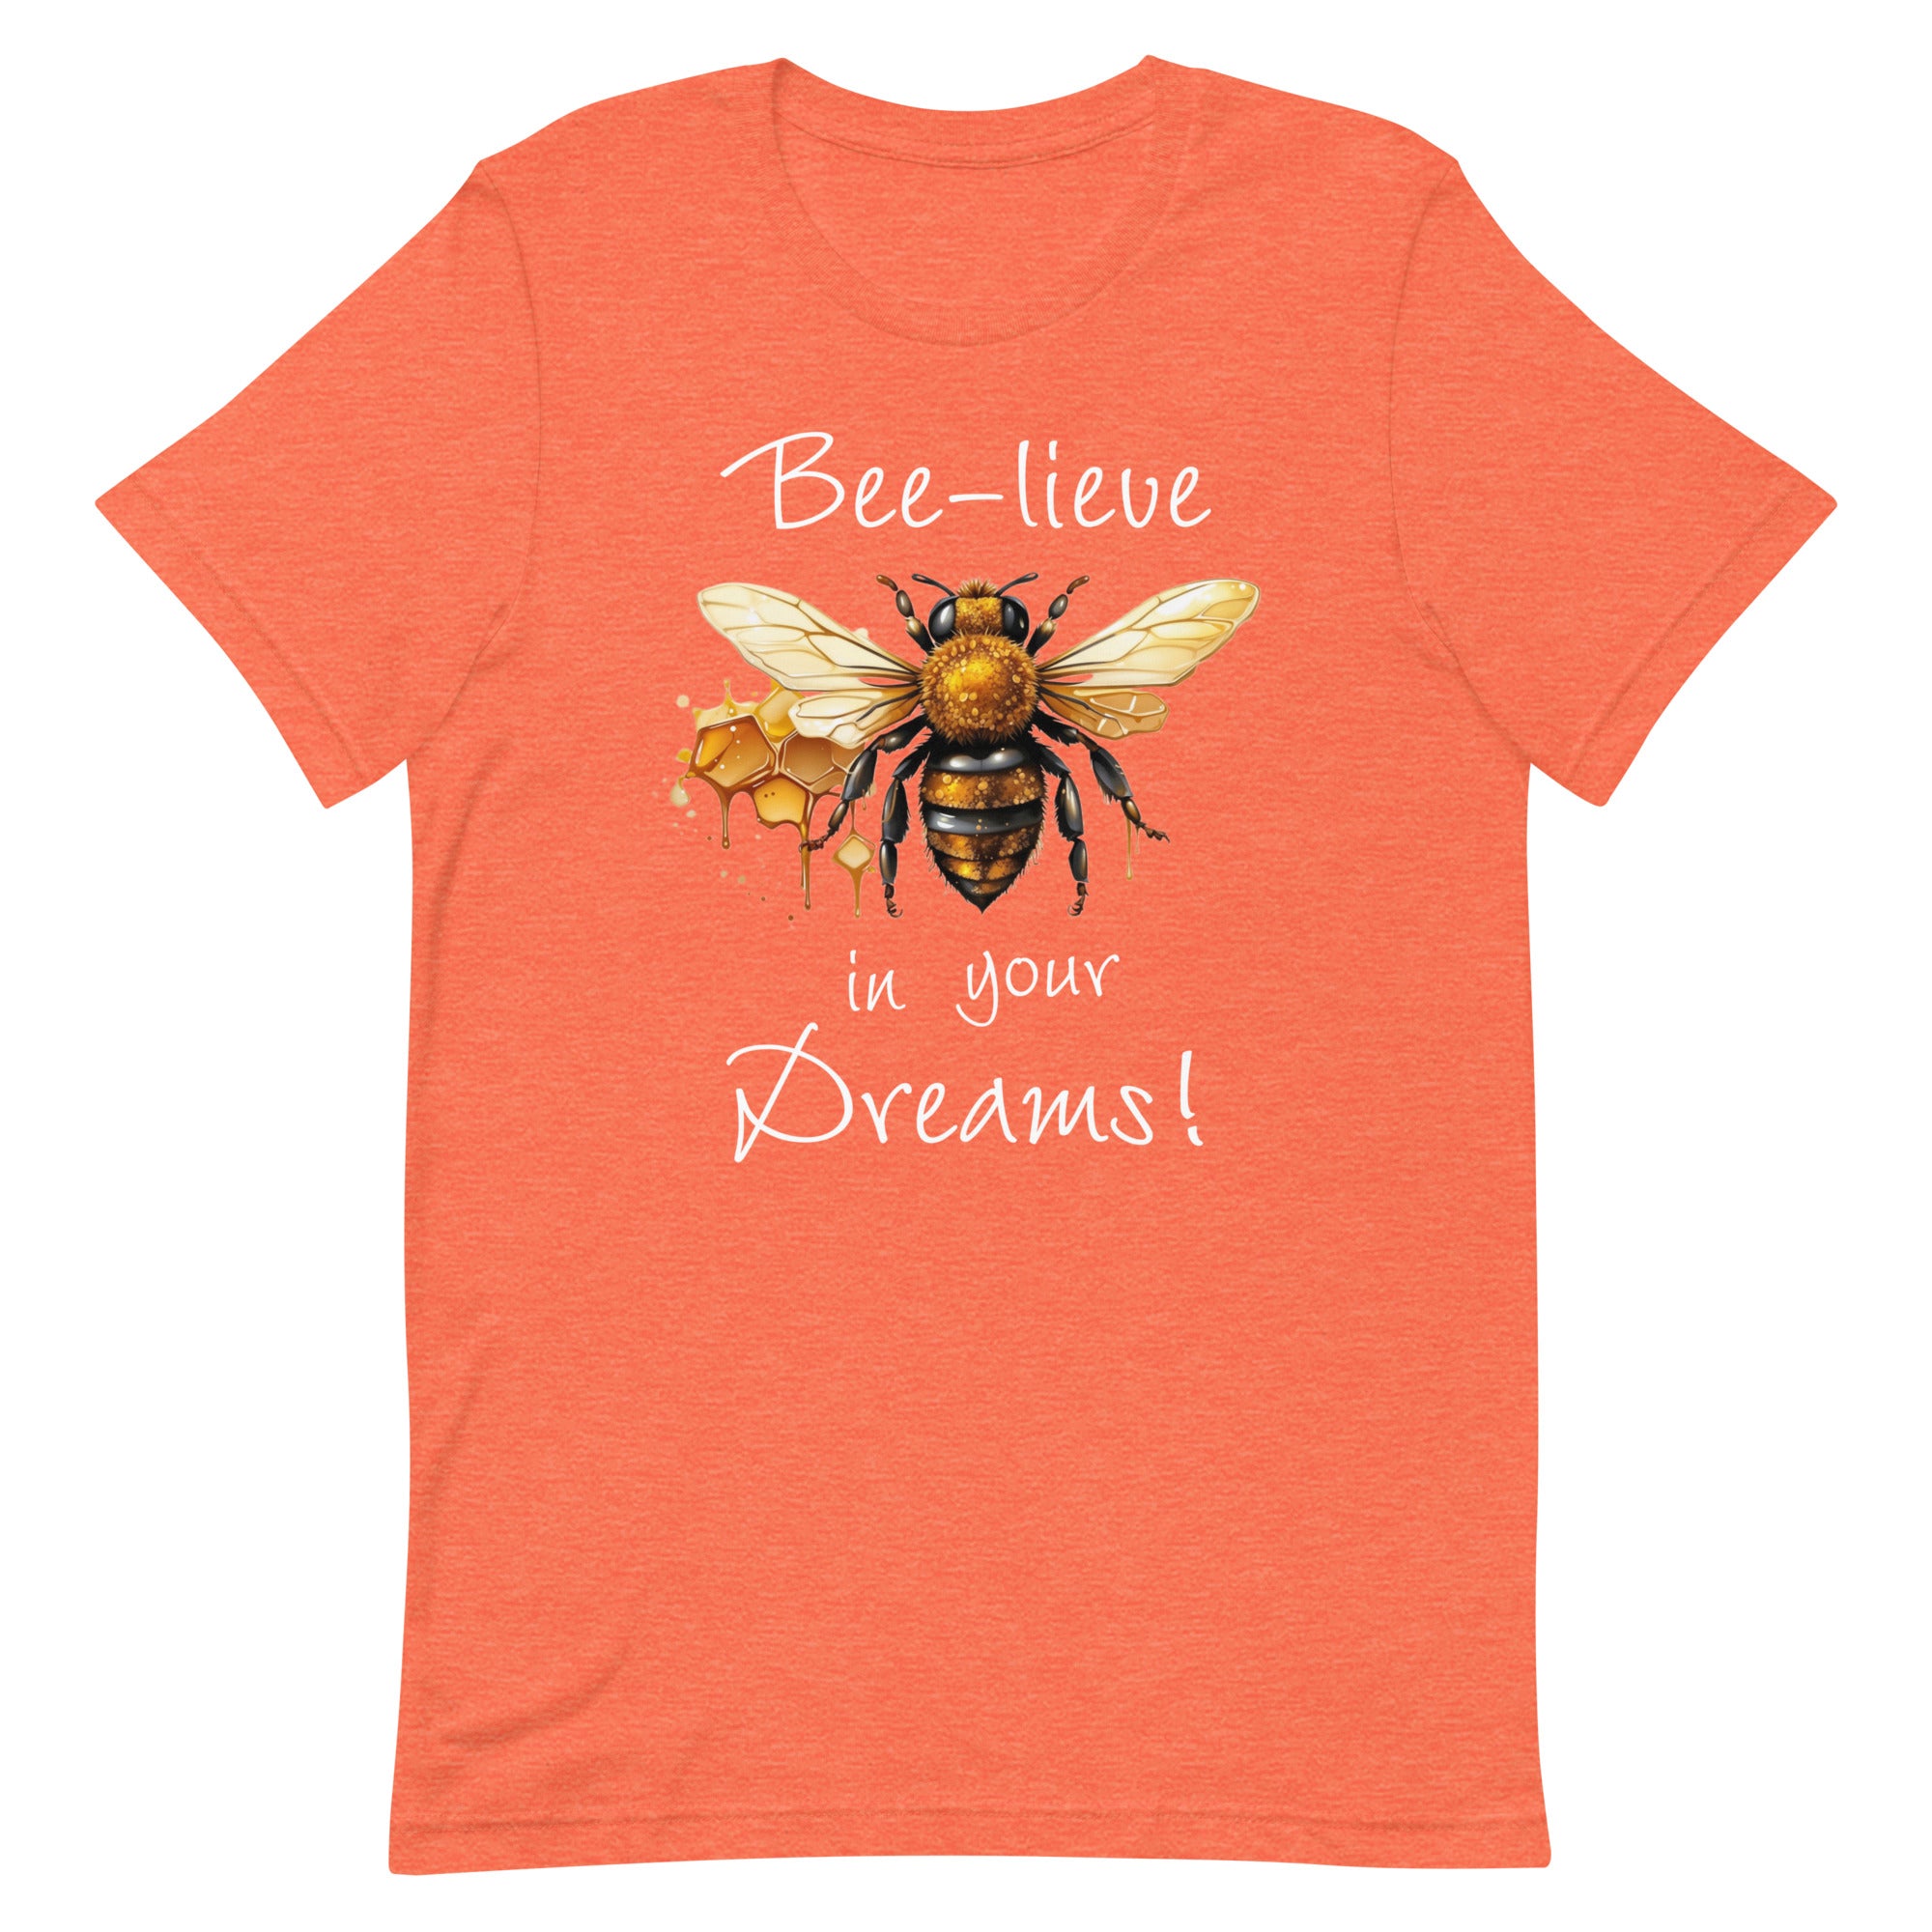 Bee-lieve in Your Dreams T-Shirt, Gift for Bee Lovers Heather Orange S XL M L DenBox